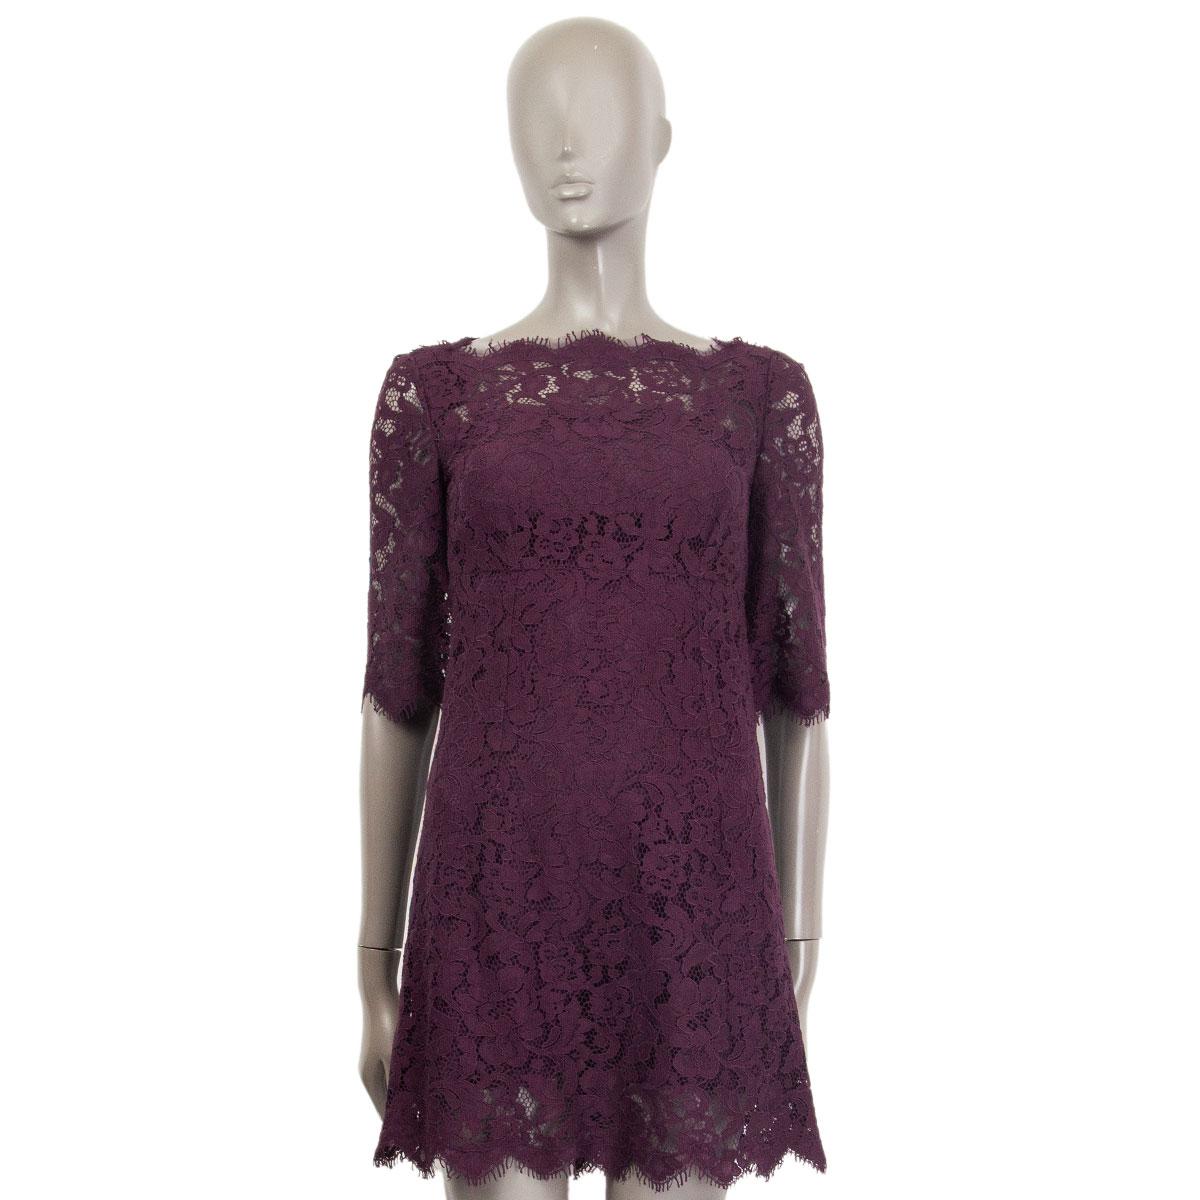 100% authentic Dolce & Gabbana 3/4 sleeve lace dress in eggplant viscose (75%) and polyamide (25%) features a bateau neckline. Opens with a zipper on the back and is lined with a slip dress in eggplant silk (96%) and elastane (4%). Has been worn and